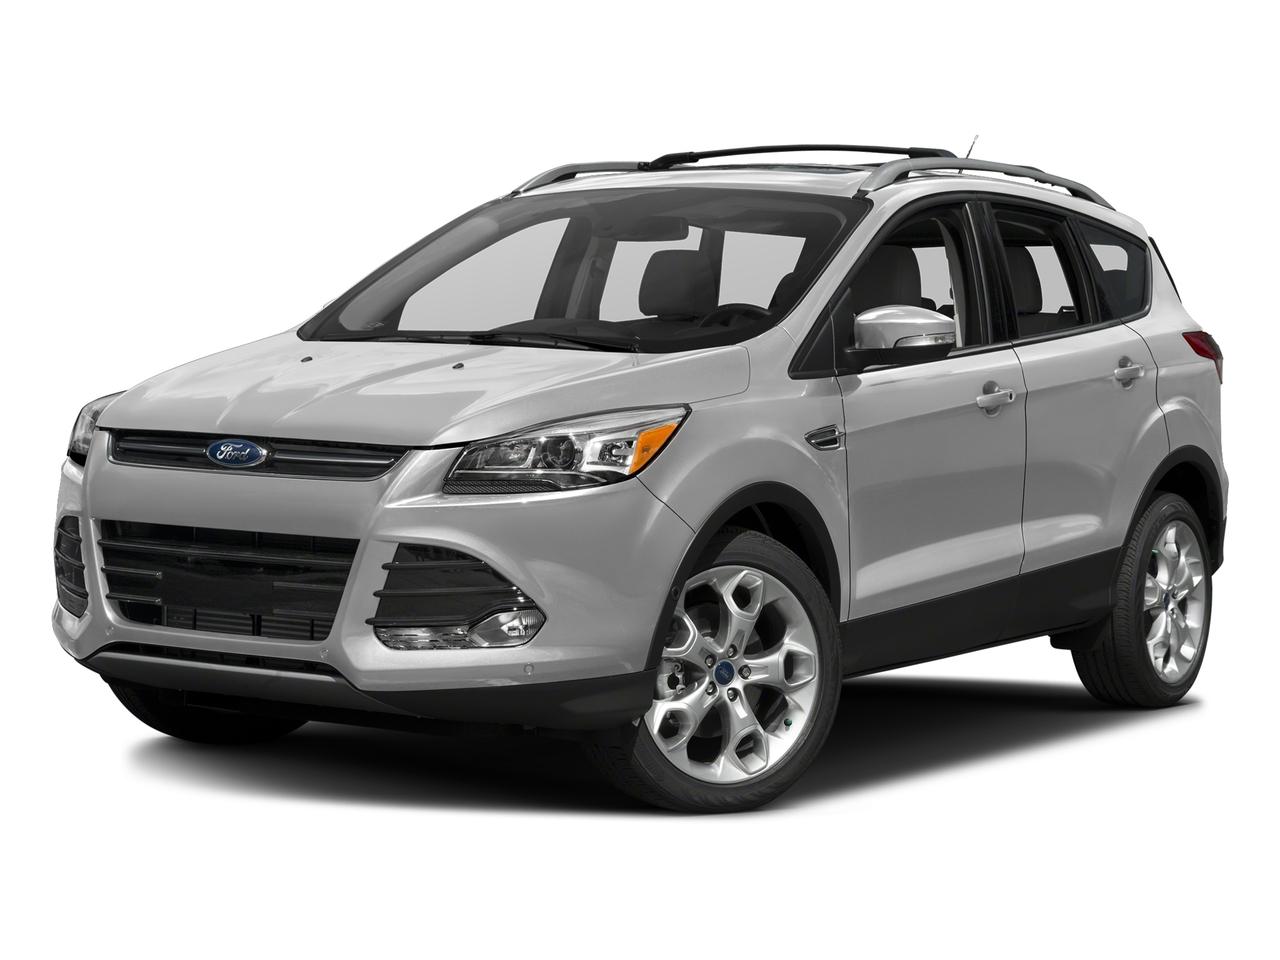 2016 Ford Escape for sale in Durant - 1FMCU9J96GUC83392 - Ron Alpen Ford